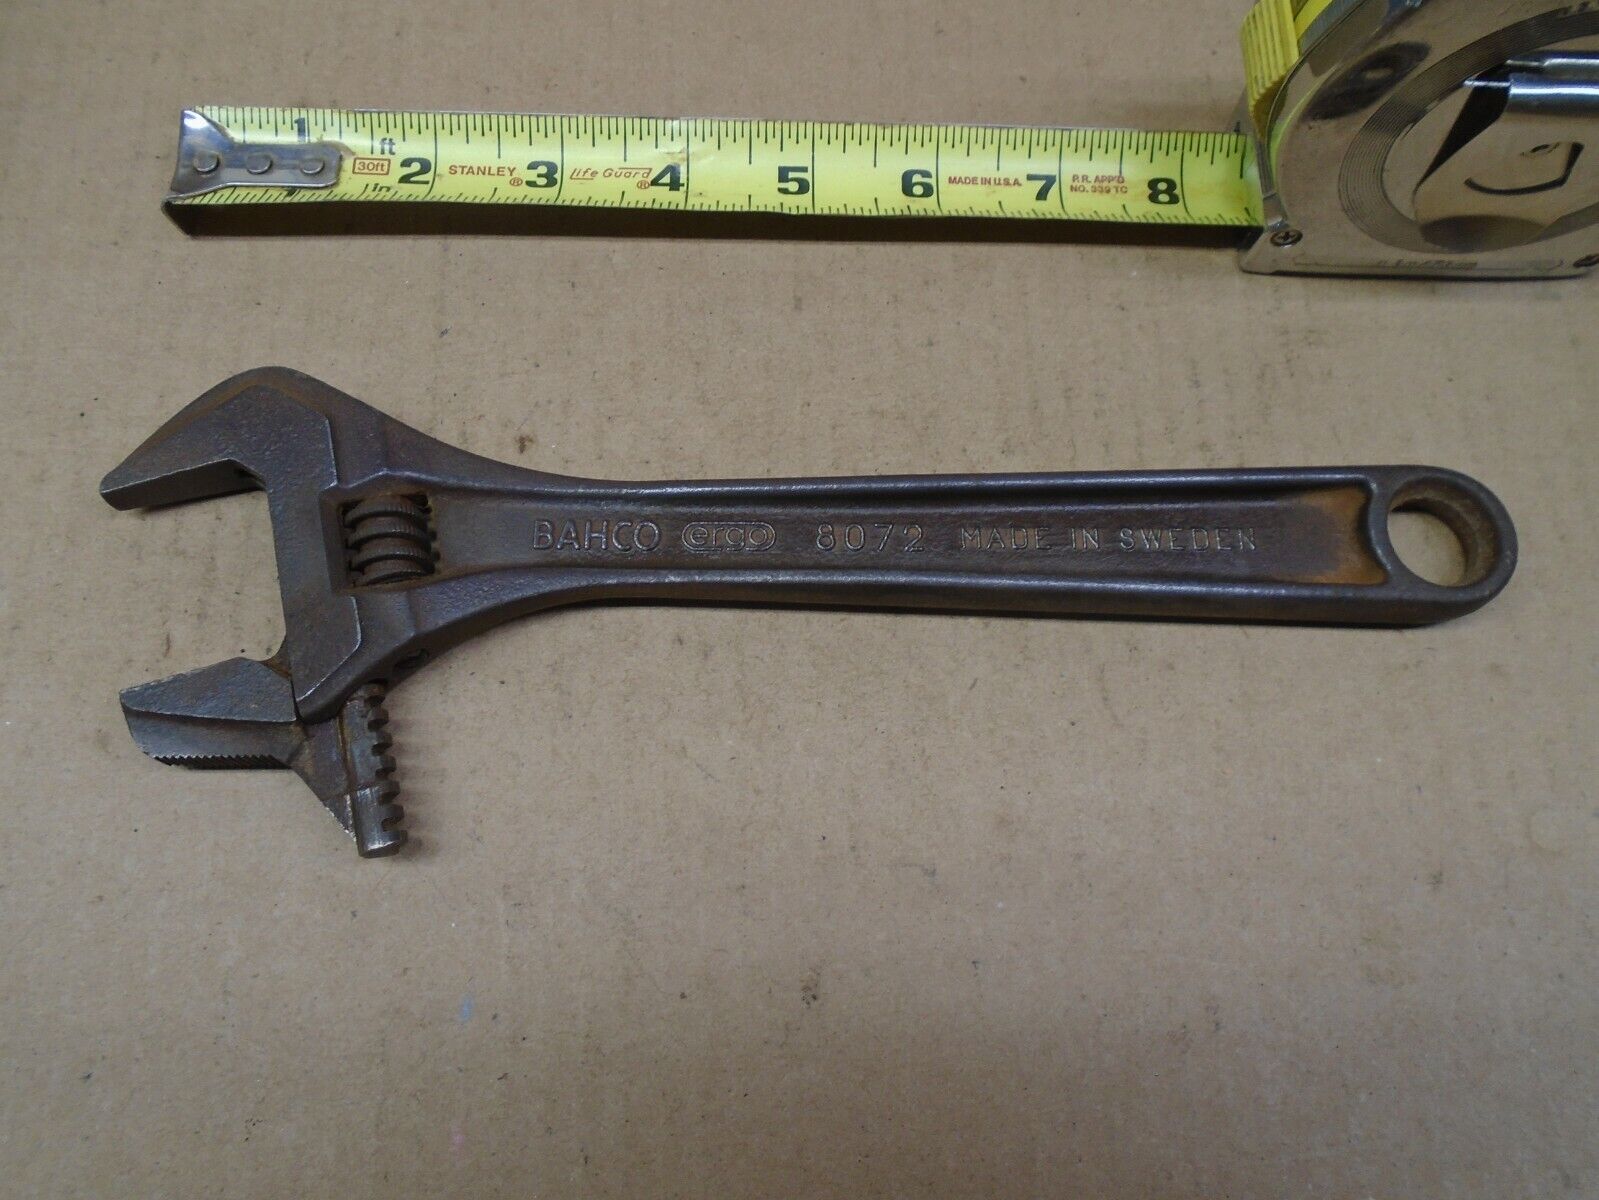 Bahco Sweden 10" Adjustable Wrench No 8072